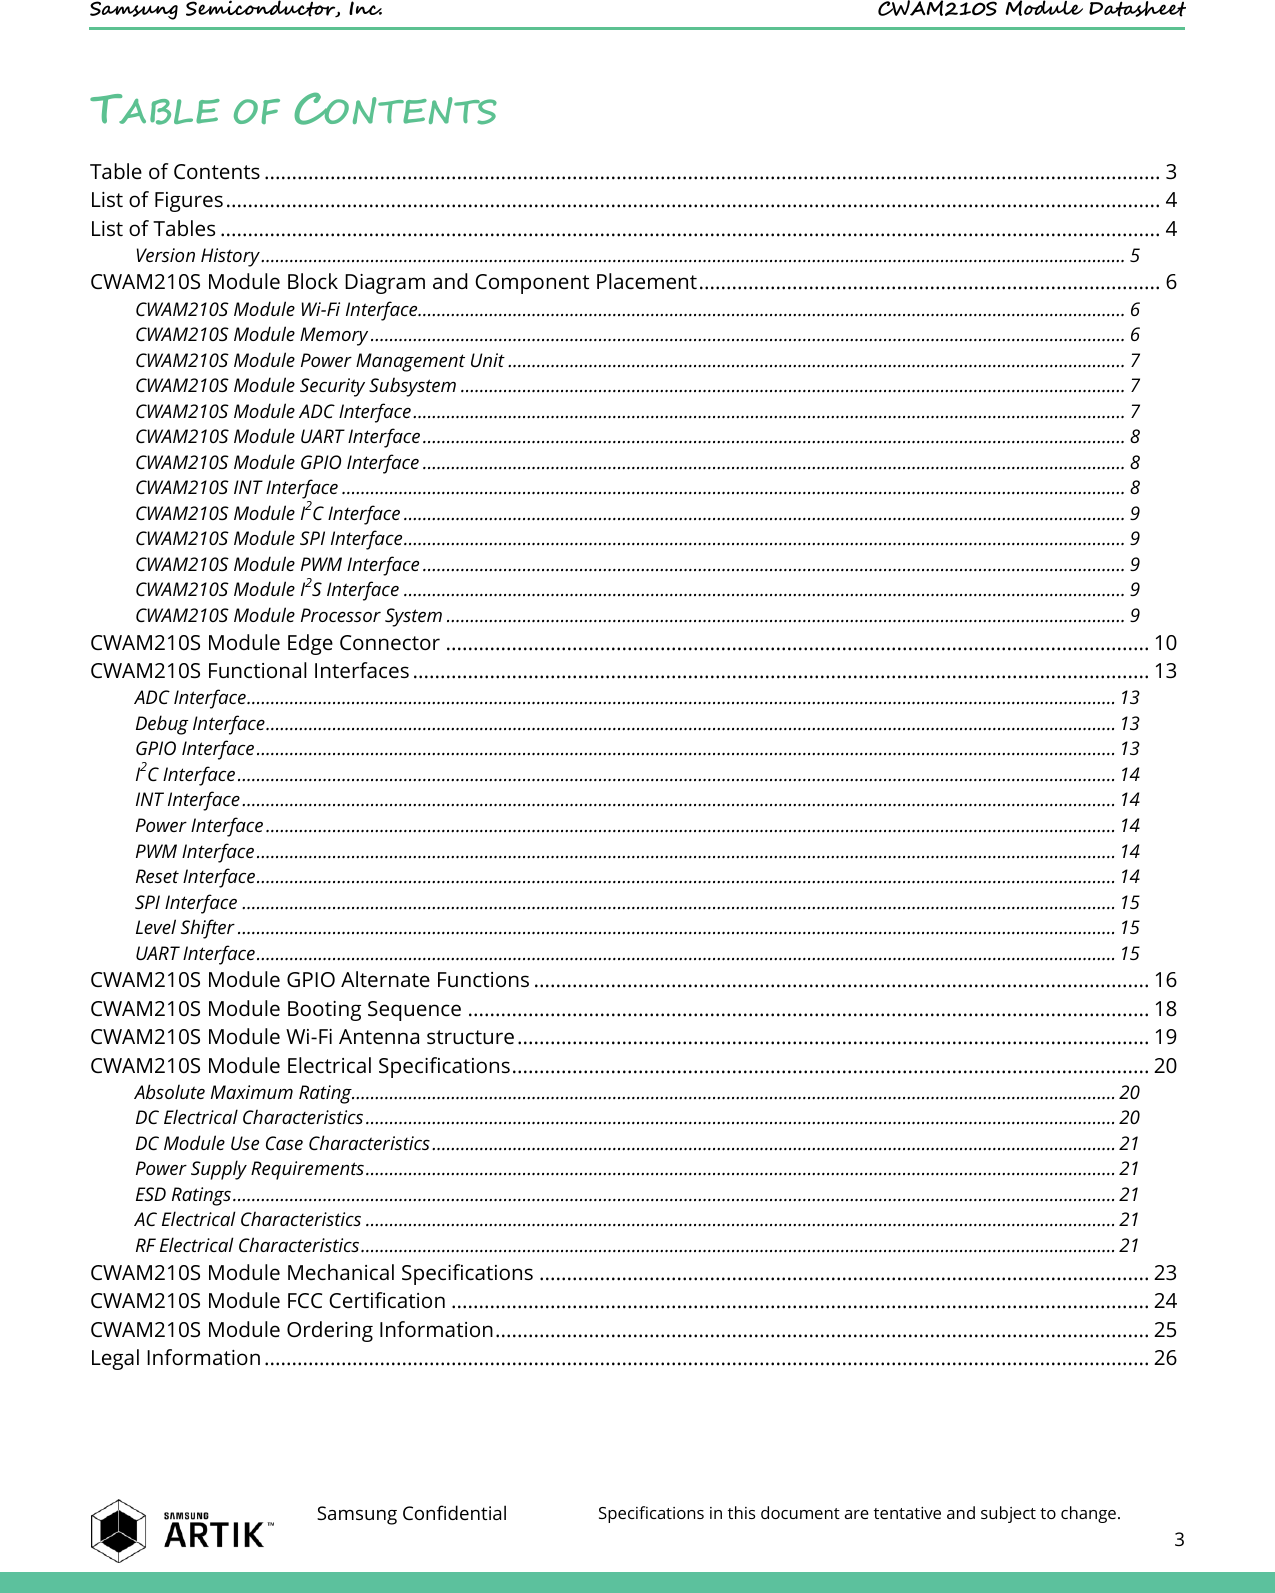    Samsung Semiconductor, Inc.  CWAM210S Module Datasheet    Samsung Confidential Specifications in this document are tentative and subject to change.  3  TABLE OF CONTENTS Table of Contents ................................................................................................................................................................... 3 List of Figures .......................................................................................................................................................................... 4 List of Tables ........................................................................................................................................................................... 4 Version History ...................................................................................................................................................................................... 5 CWAM210S Module Block Diagram and Component Placement .................................................................................... 6 CWAM210S Module Wi-Fi Interface..................................................................................................................................................... 6 CWAM210S Module Memory ............................................................................................................................................................... 6 CWAM210S Module Power Management Unit .................................................................................................................................. 7 CWAM210S Module Security Subsystem ............................................................................................................................................ 7 CWAM210S Module ADC Interface ...................................................................................................................................................... 7 CWAM210S Module UART Interface .................................................................................................................................................... 8 CWAM210S Module GPIO Interface .................................................................................................................................................... 8 CWAM210S INT Interface ..................................................................................................................................................................... 8 CWAM210S Module I2C Interface ........................................................................................................................................................ 9 CWAM210S Module SPI Interface ........................................................................................................................................................ 9 CWAM210S Module PWM Interface .................................................................................................................................................... 9 CWAM210S Module I2S Interface ........................................................................................................................................................ 9 CWAM210S Module Processor System ............................................................................................................................................... 9 CWAM210S Module Edge Connector ................................................................................................................................ 10 CWAM210S Functional Interfaces ...................................................................................................................................... 13 ADC Interface ....................................................................................................................................................................................... 13 Debug Interface ................................................................................................................................................................................... 13 GPIO Interface ..................................................................................................................................................................................... 13 I2C Interface ......................................................................................................................................................................................... 14 INT Interface ........................................................................................................................................................................................ 14 Power Interface ................................................................................................................................................................................... 14 PWM Interface ..................................................................................................................................................................................... 14 Reset Interface ..................................................................................................................................................................................... 14 SPI Interface ........................................................................................................................................................................................ 15 Level Shifter ......................................................................................................................................................................................... 15 UART Interface ..................................................................................................................................................................................... 15 CWAM210S Module GPIO Alternate Functions ................................................................................................................ 16 CWAM210S Module Booting Sequence ............................................................................................................................ 18 CWAM210S Module Wi-Fi Antenna structure ................................................................................................................... 19 CWAM210S Module Electrical Specifications .................................................................................................................... 20 Absolute Maximum Rating ................................................................................................................................................................. 20 DC Electrical Characteristics .............................................................................................................................................................. 20 DC Module Use Case Characteristics ................................................................................................................................................ 21 Power Supply Requirements .............................................................................................................................................................. 21 ESD Ratings .......................................................................................................................................................................................... 21 AC Electrical Characteristics .............................................................................................................................................................. 21 RF Electrical Characteristics ............................................................................................................................................................... 21 CWAM210S Module Mechanical Specifications ............................................................................................................... 23 CWAM210S Module FCC Certification ............................................................................................................................... 24 CWAM210S Module Ordering Information ....................................................................................................................... 25 Legal Information ................................................................................................................................................................. 26  